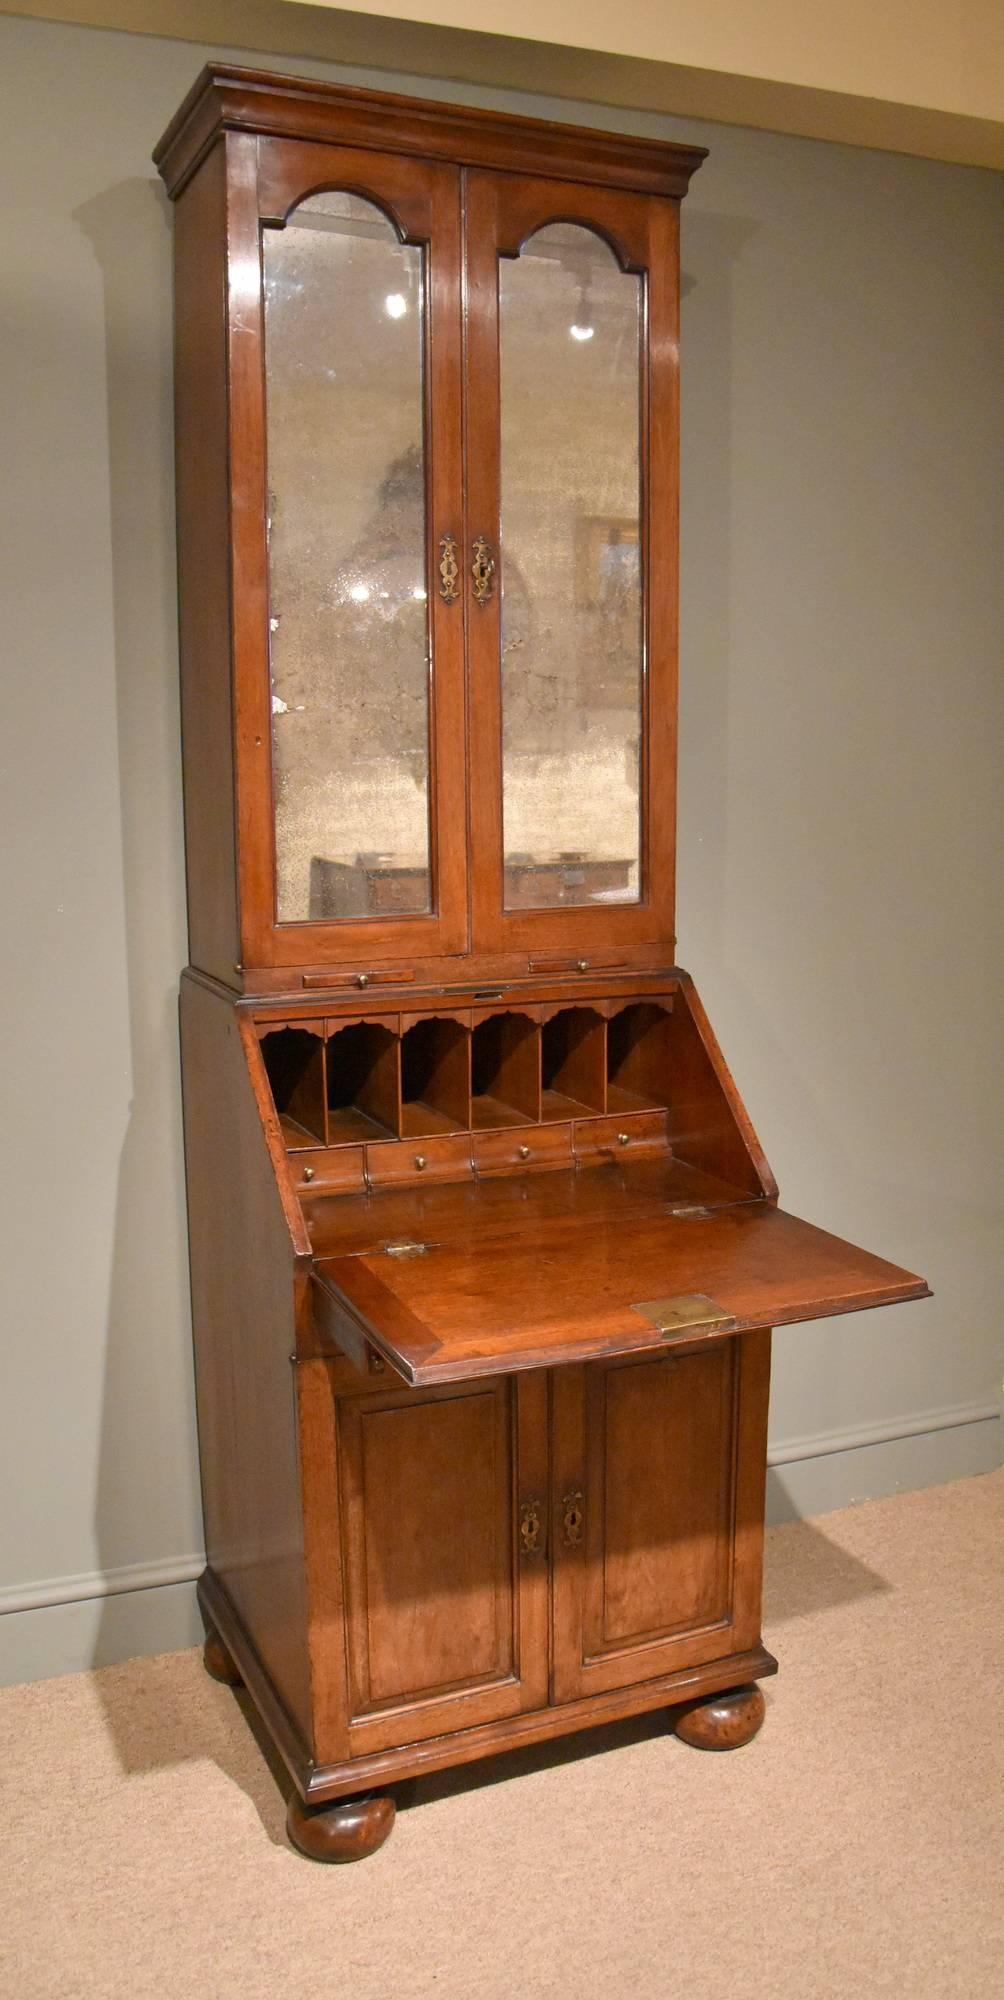 A rare and unusual early 18th century solid walnut bureau bookcase of small size. Mirrored doors enclosing adjustable shelves below cupboard doors. The bureau with pigeon holes and an arrangement of four drawers is enclosed by writing tall. The